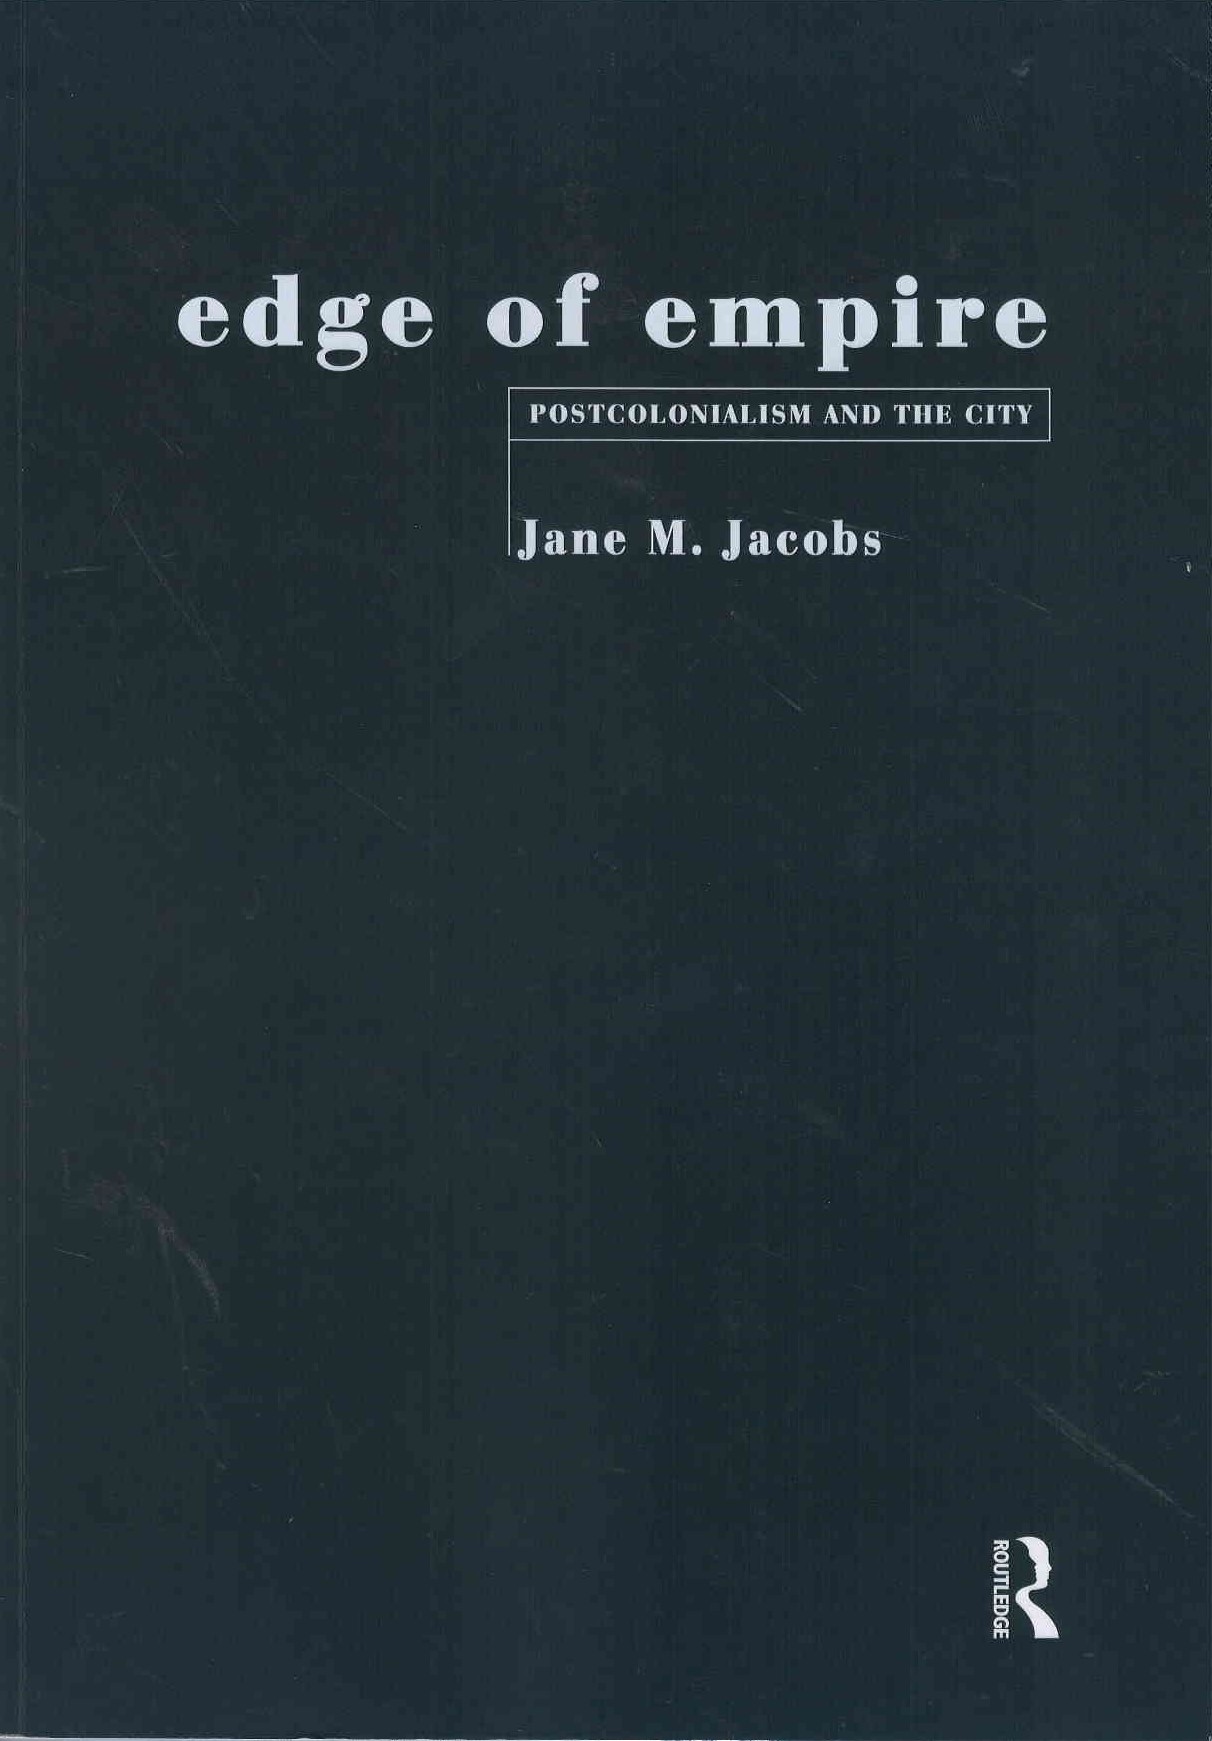 Edge of empire : postcolonialism and the city